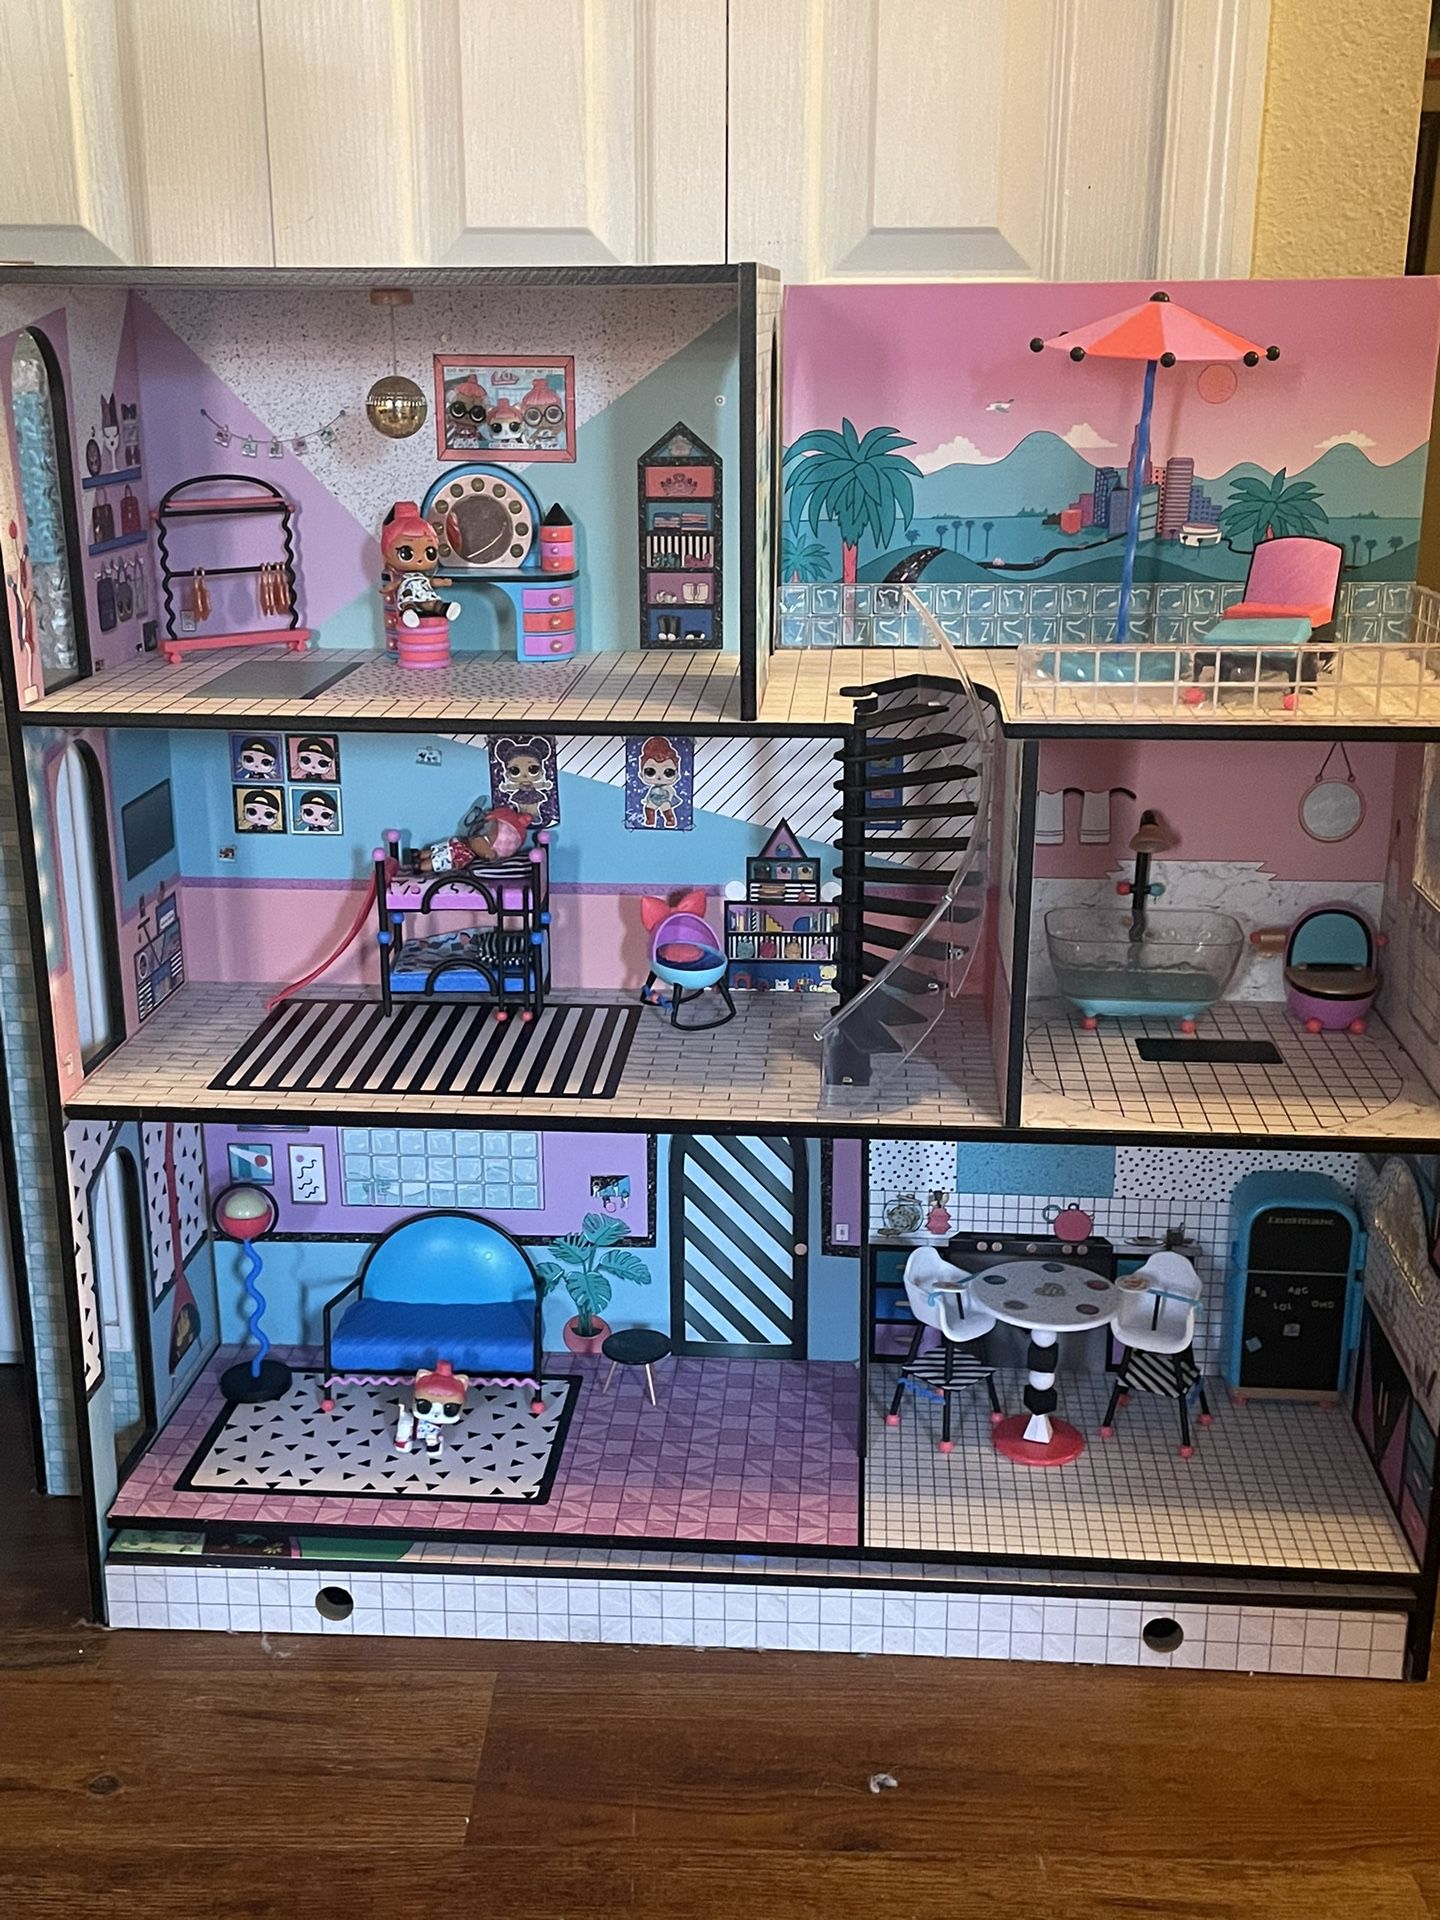 LOL Surprise OMG House Real Wood Dollhouse